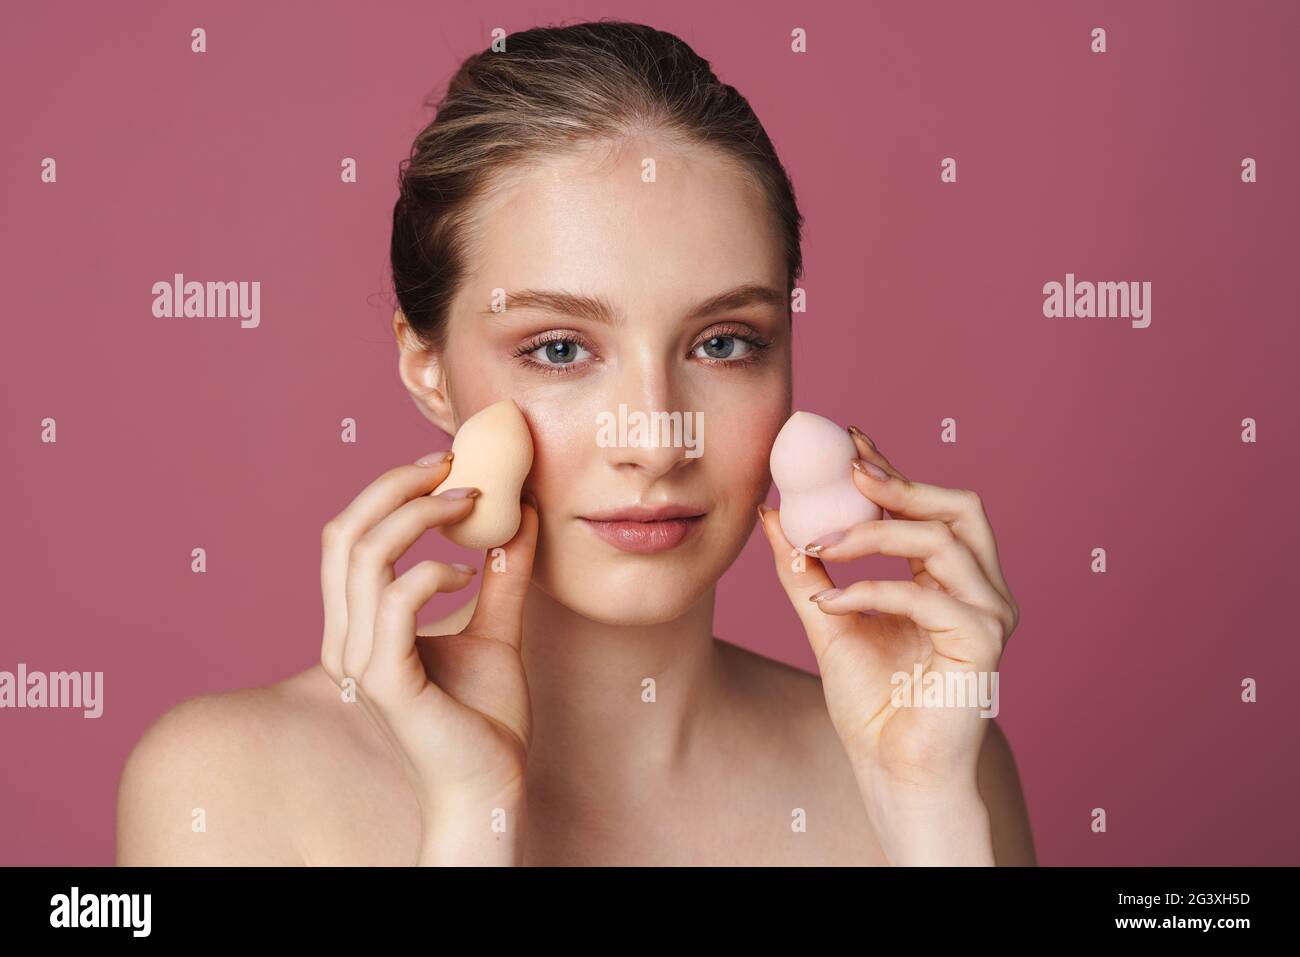 Beautiful young woman applying makeup using beauty blender sponge isolated over pink background Stock Photo